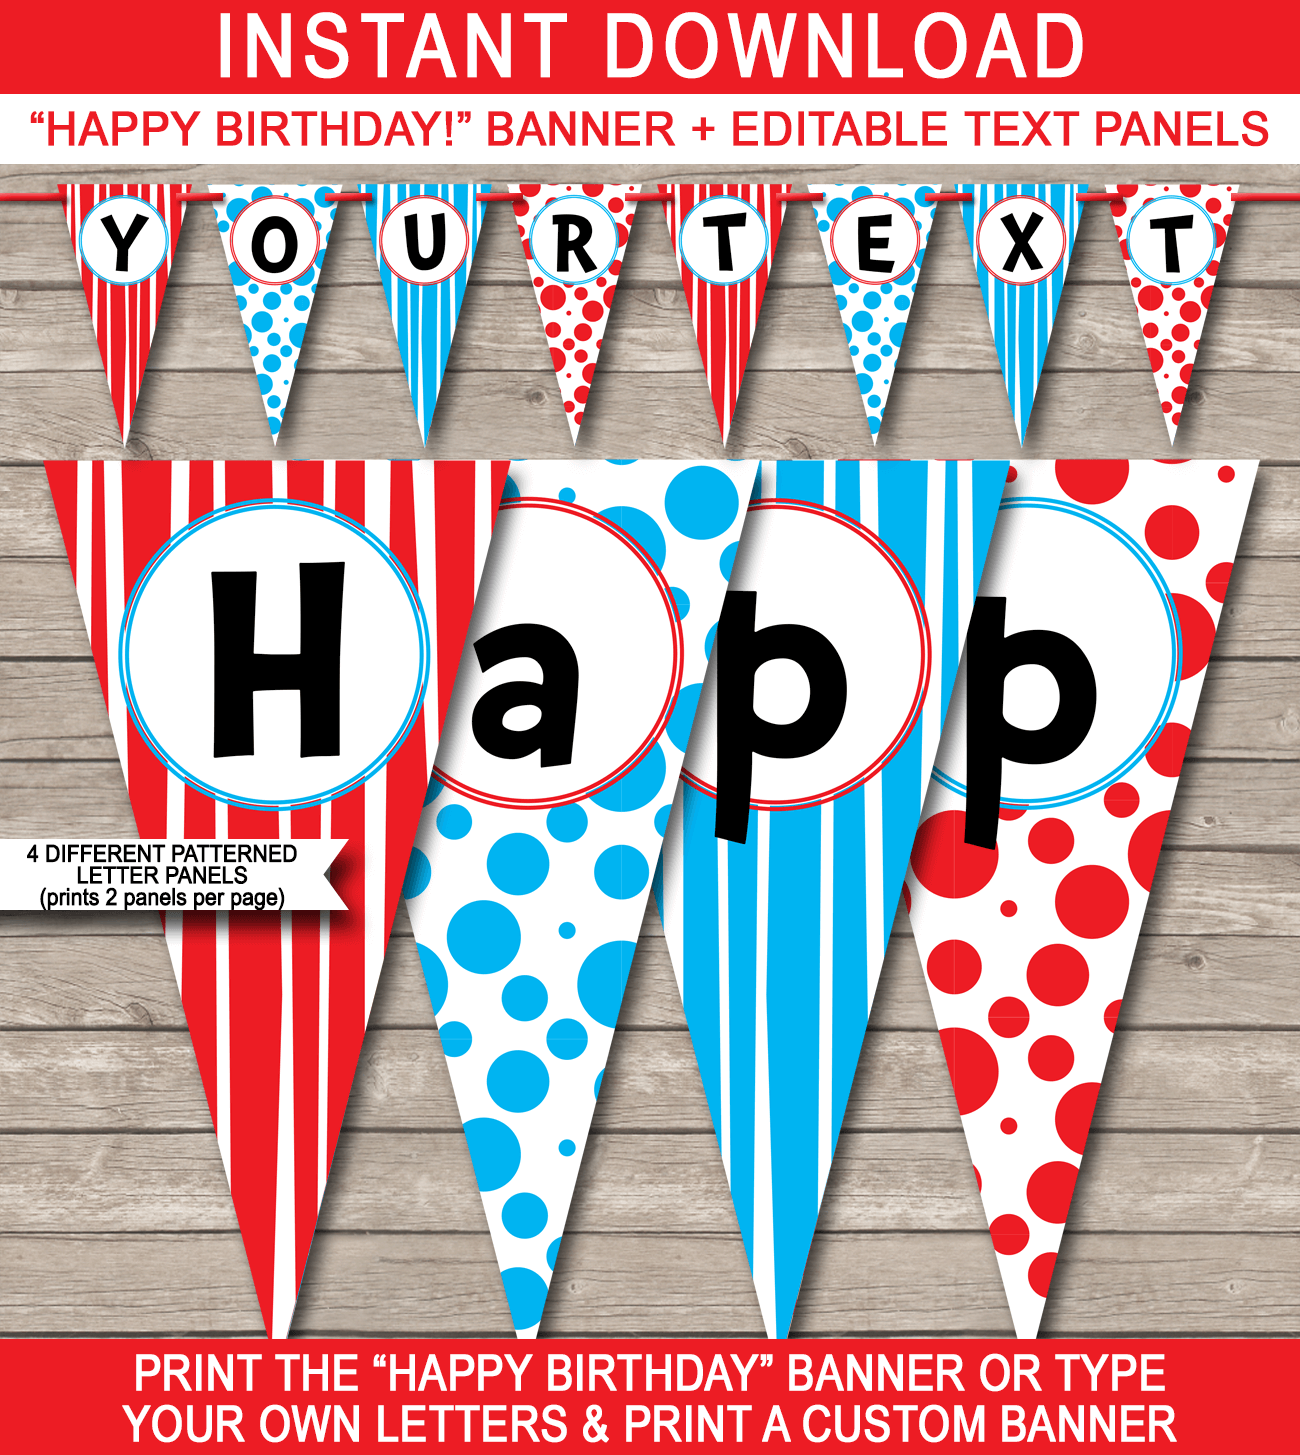 Dr Seuss Party Banner Template - Dr Seuss Bunting - Happy Birthday Banner - Birthday Party - Editable and Printable DIY Template - INSTANT DOWNLOAD $4.50 via simonemadeit.com